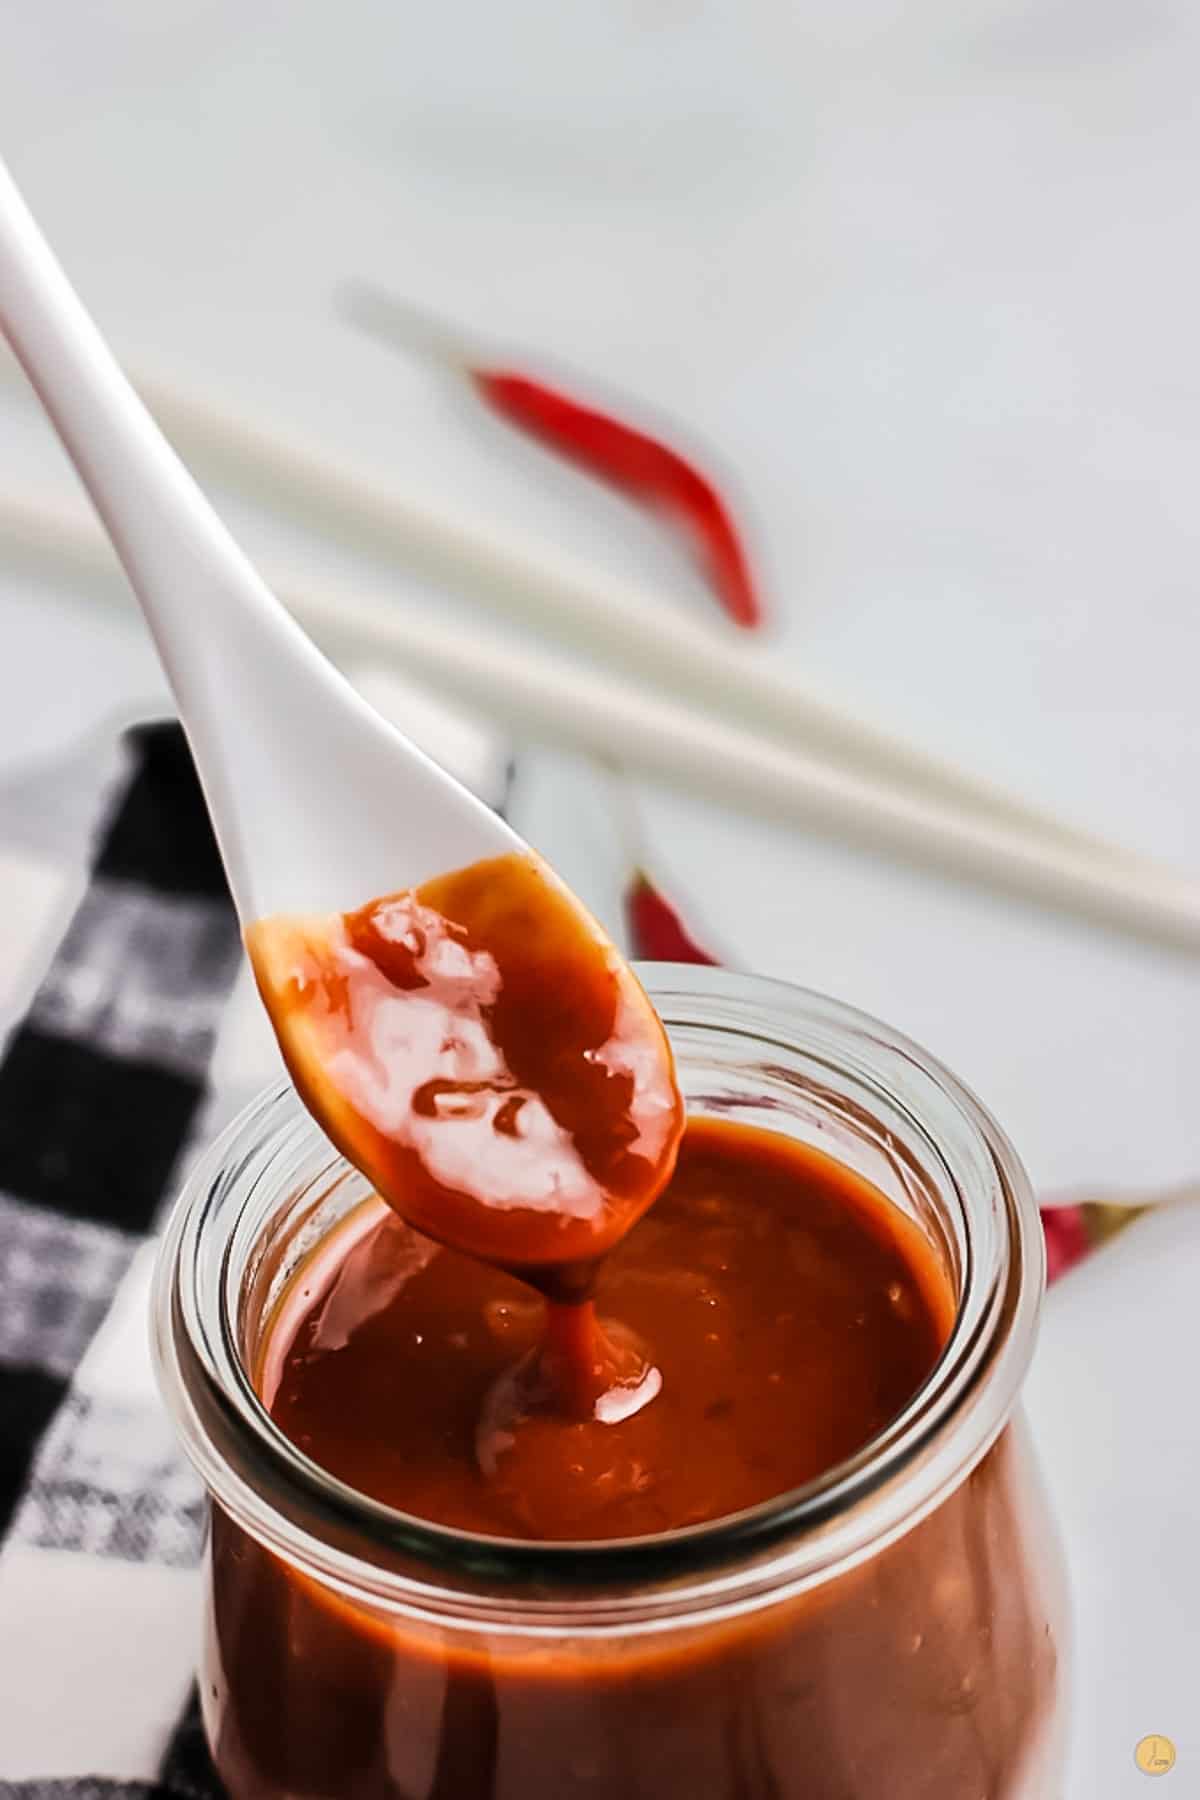 make your own hoisin sauce instead of plum sauce for your favorite foods.